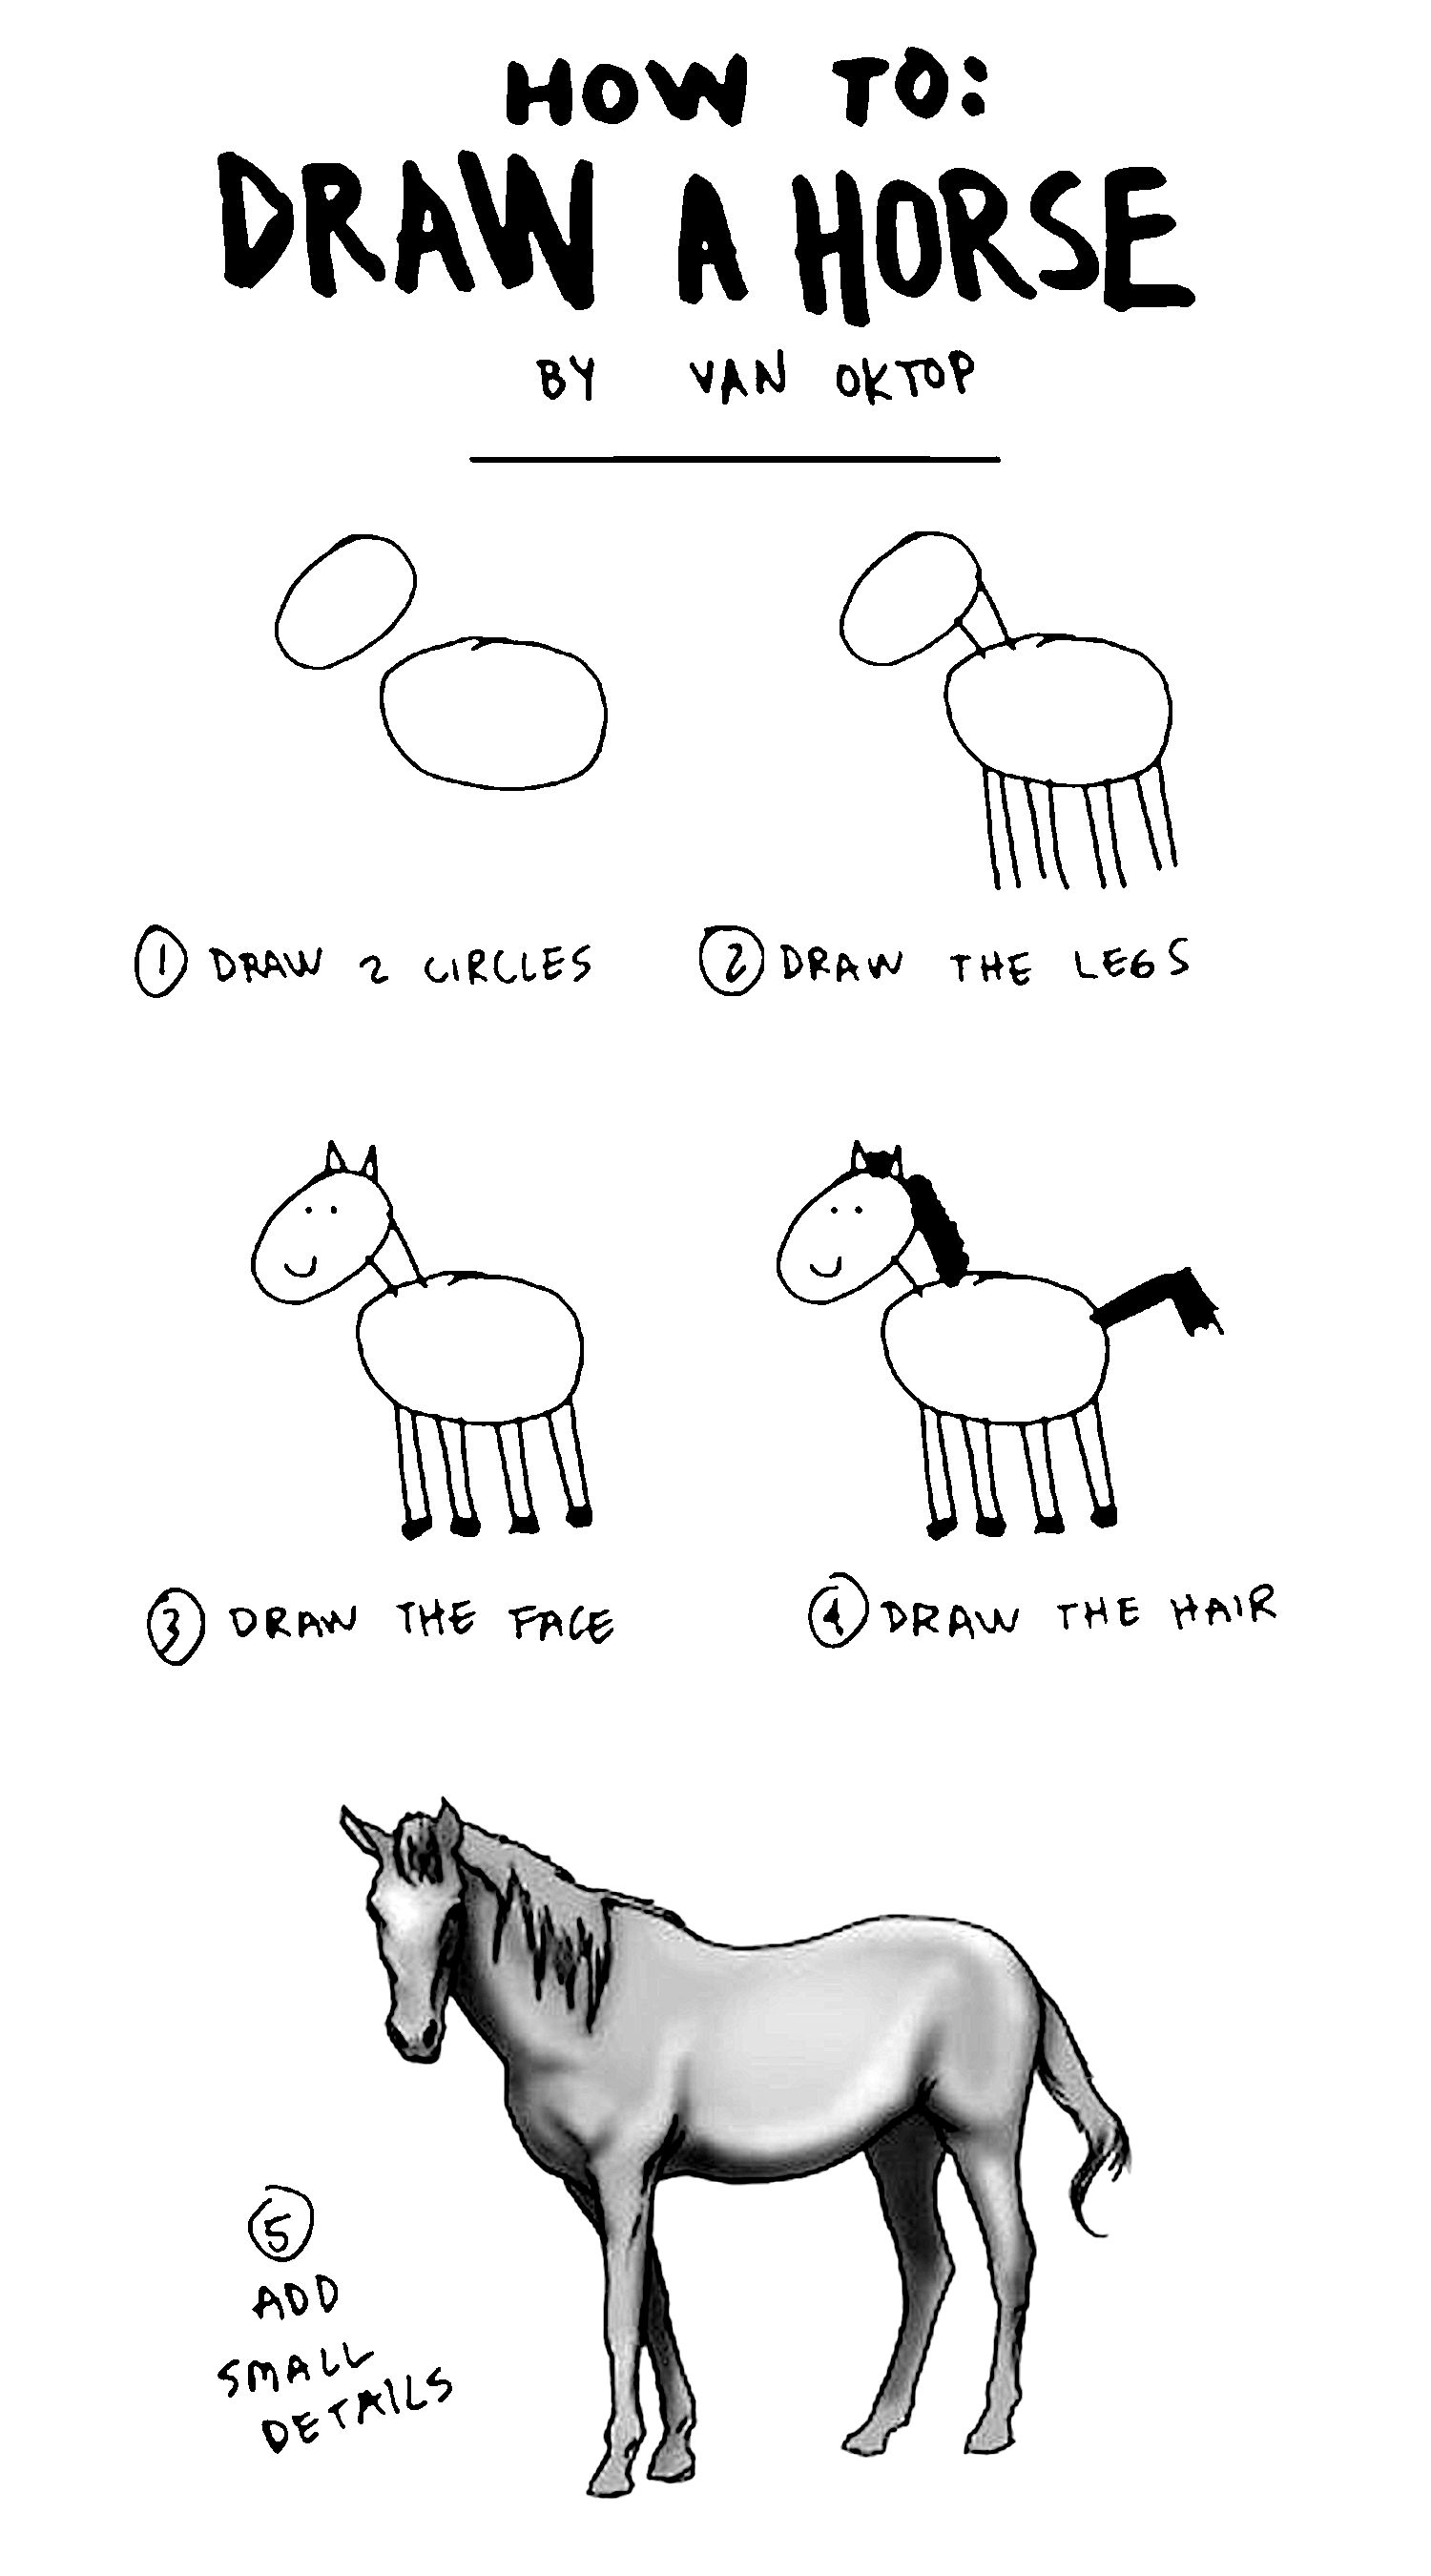 How to draw a horse. First, draw two circle. Second, draw the legs. Third, draw the face. Fourth, draw the hair. Fifth, add small details.